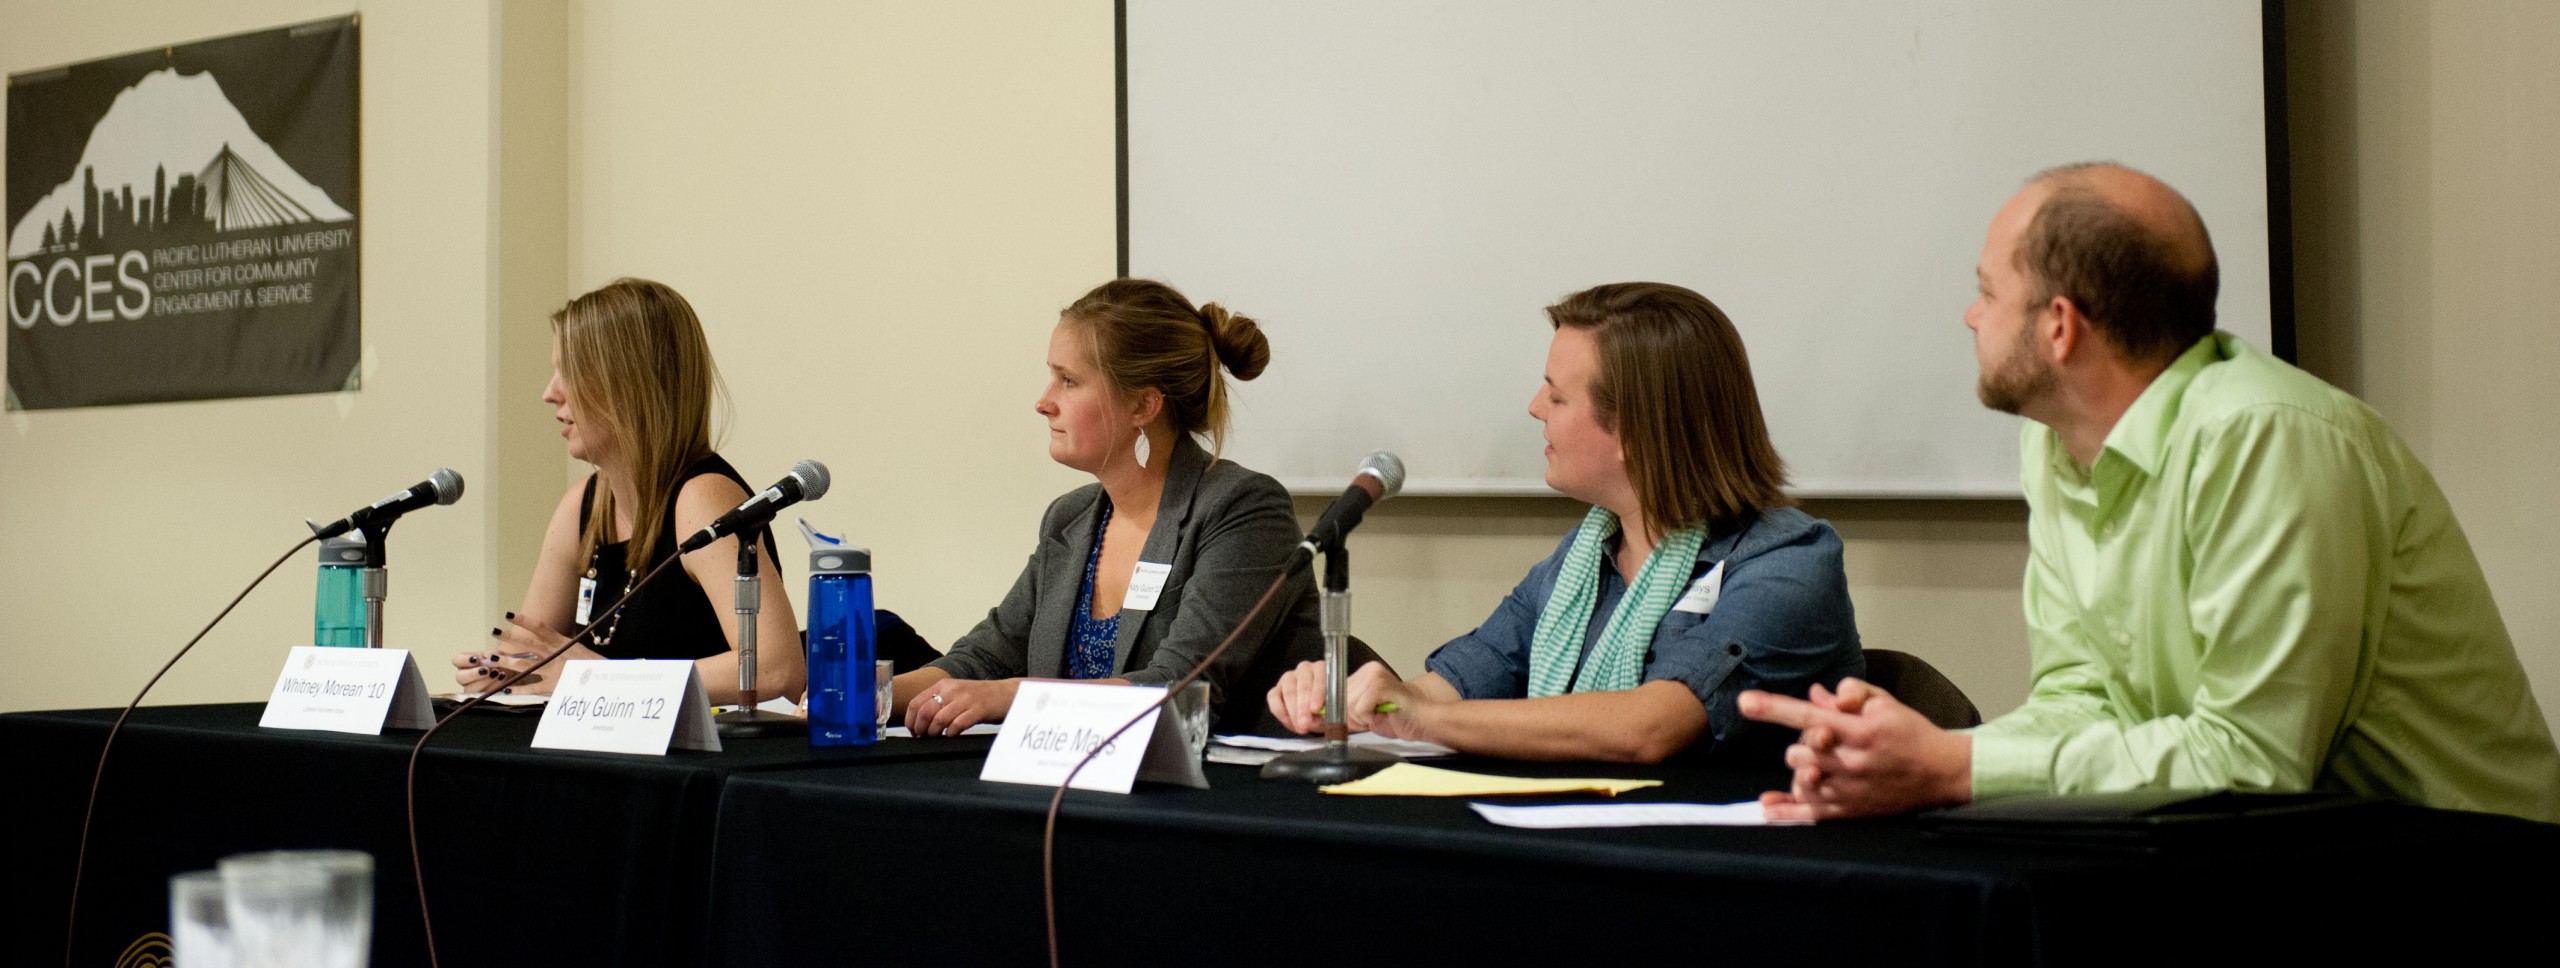 Participants speak at the 2013 Working for Change Panel during Hunger and Homelessness Awareness Week. (Photo: John Froschauer/PLU)